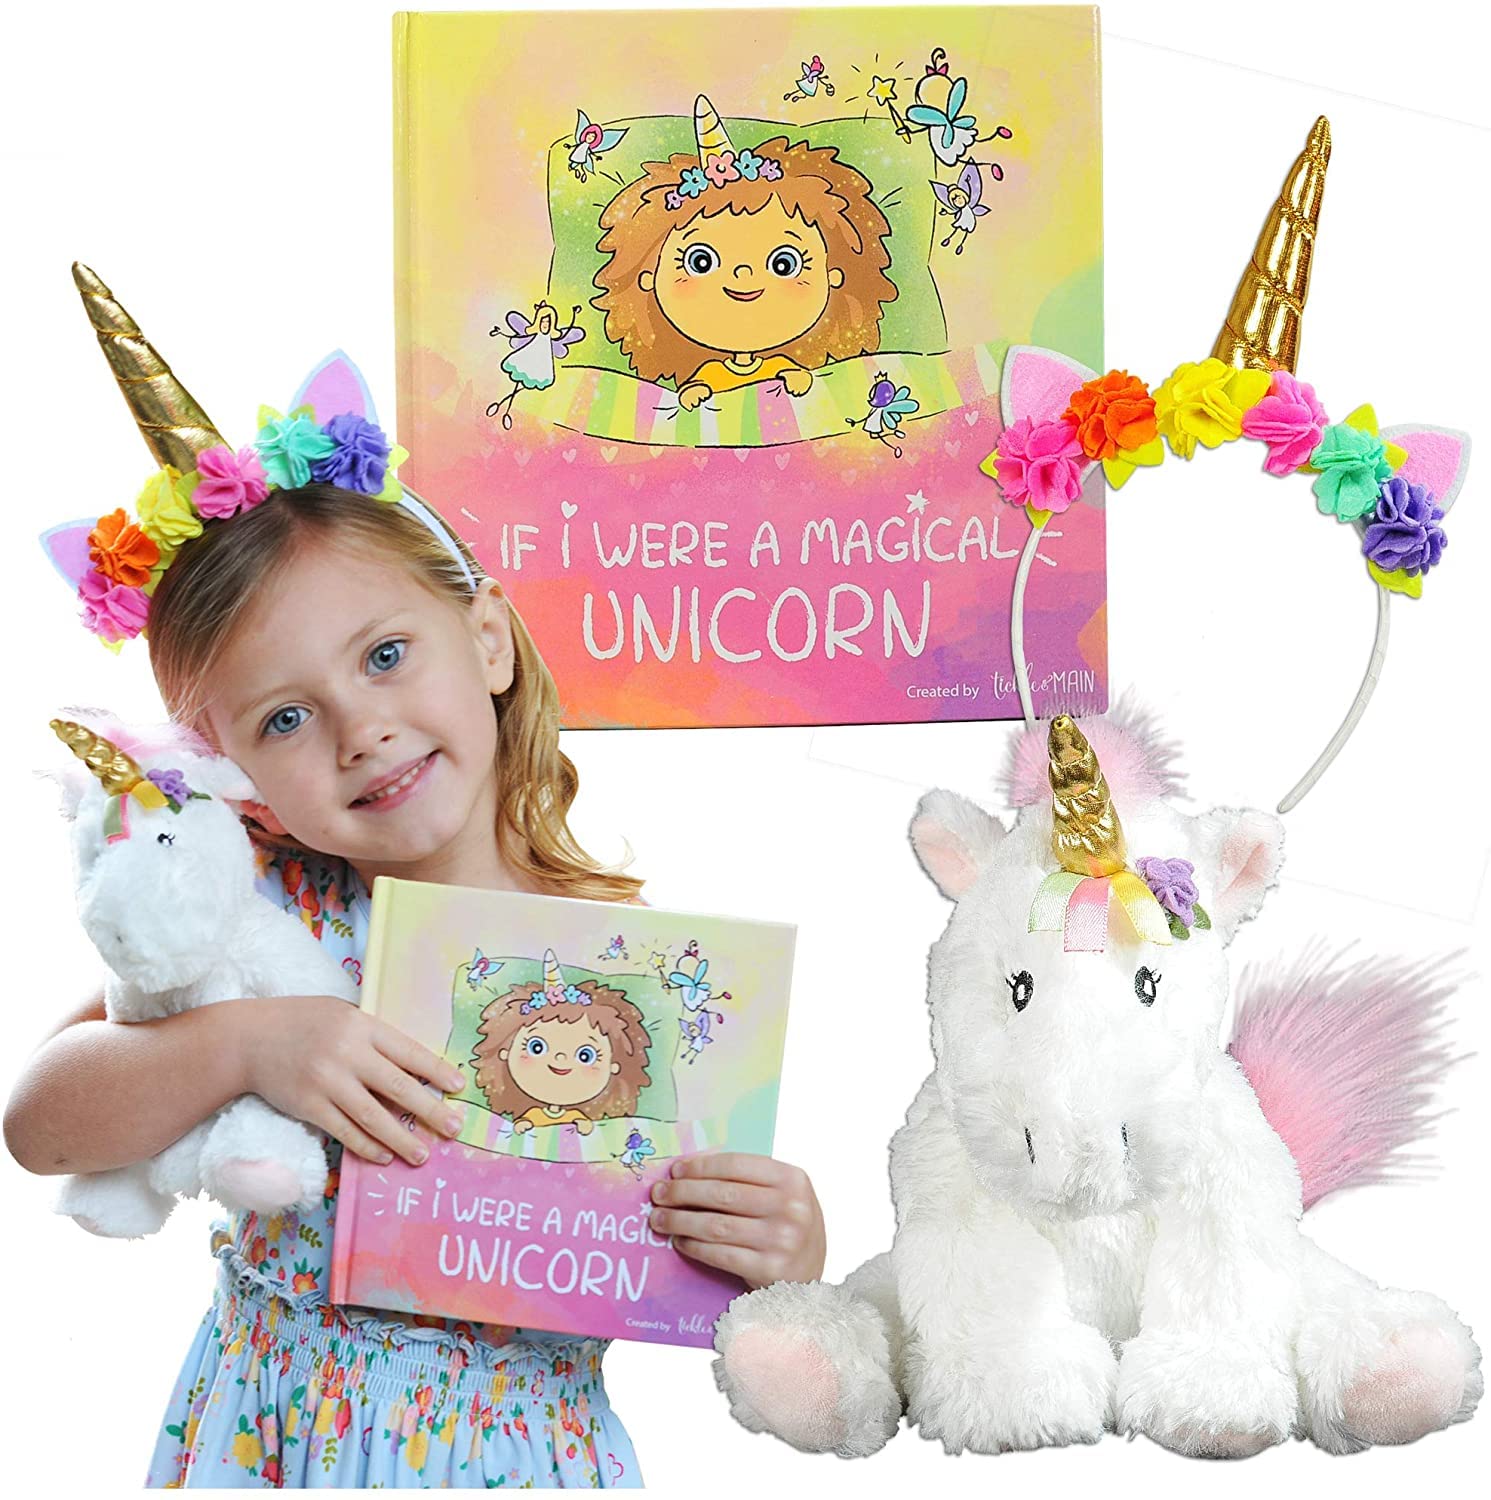 Unicorn Gift Set – Includes Book, Stuffed Plush Toy, and Headband for Girls - If I were A Magical Unicorn – Great for Birthday, Christmas, Imaginative Play